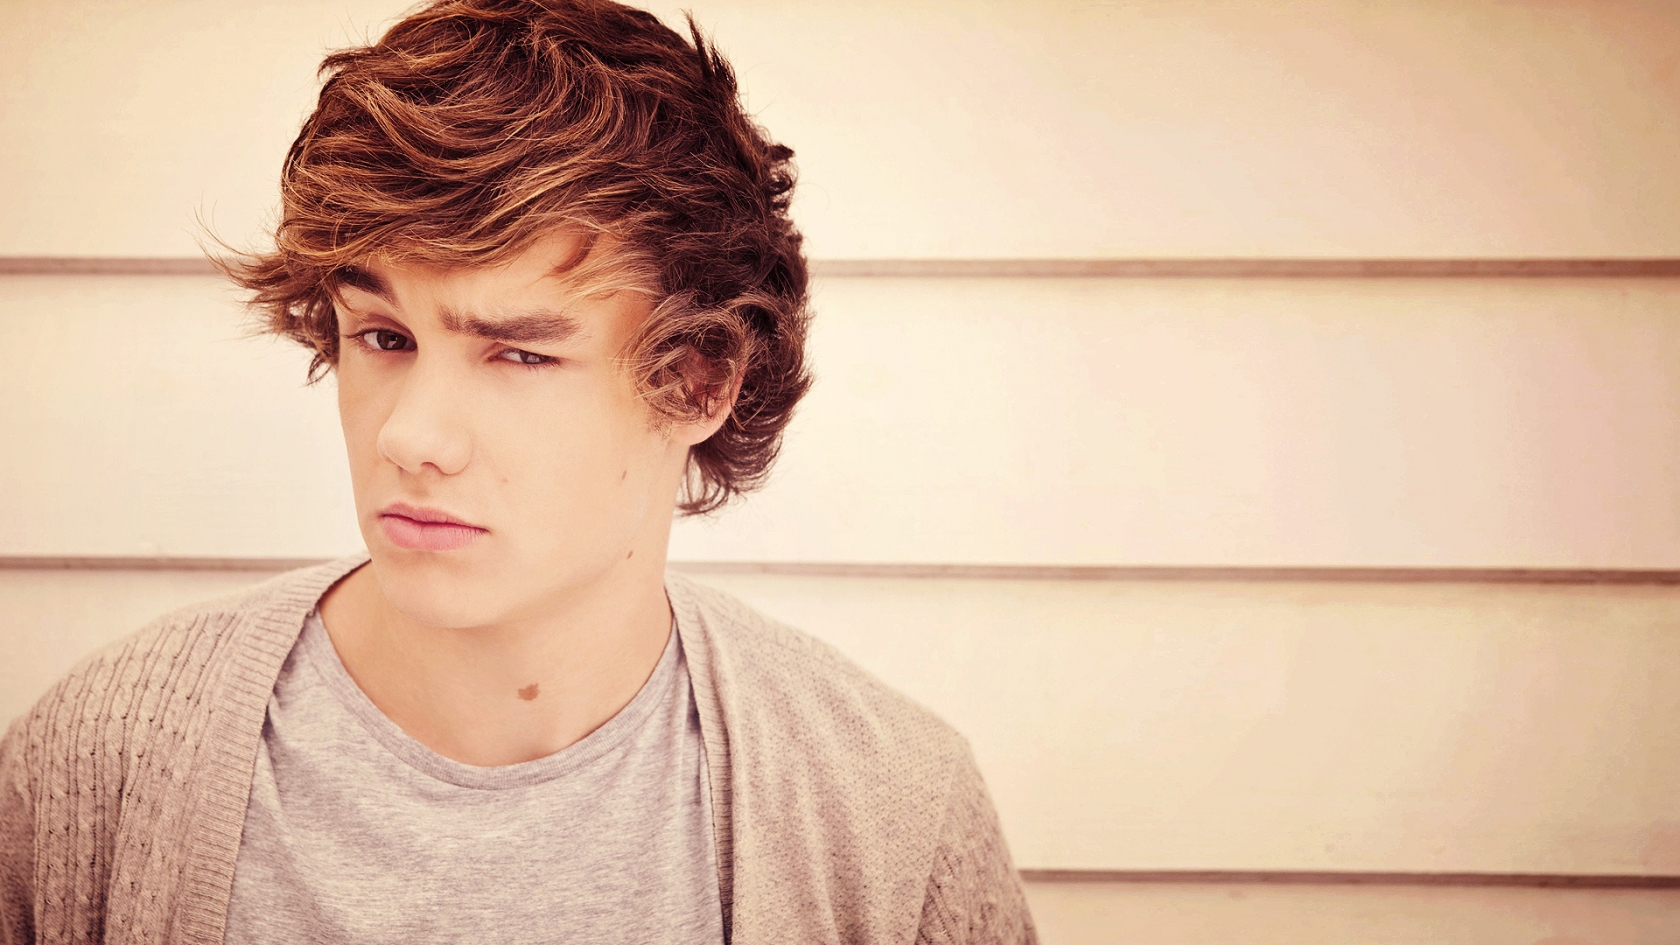 Liam Payne Look for 1680 x 945 HDTV resolution